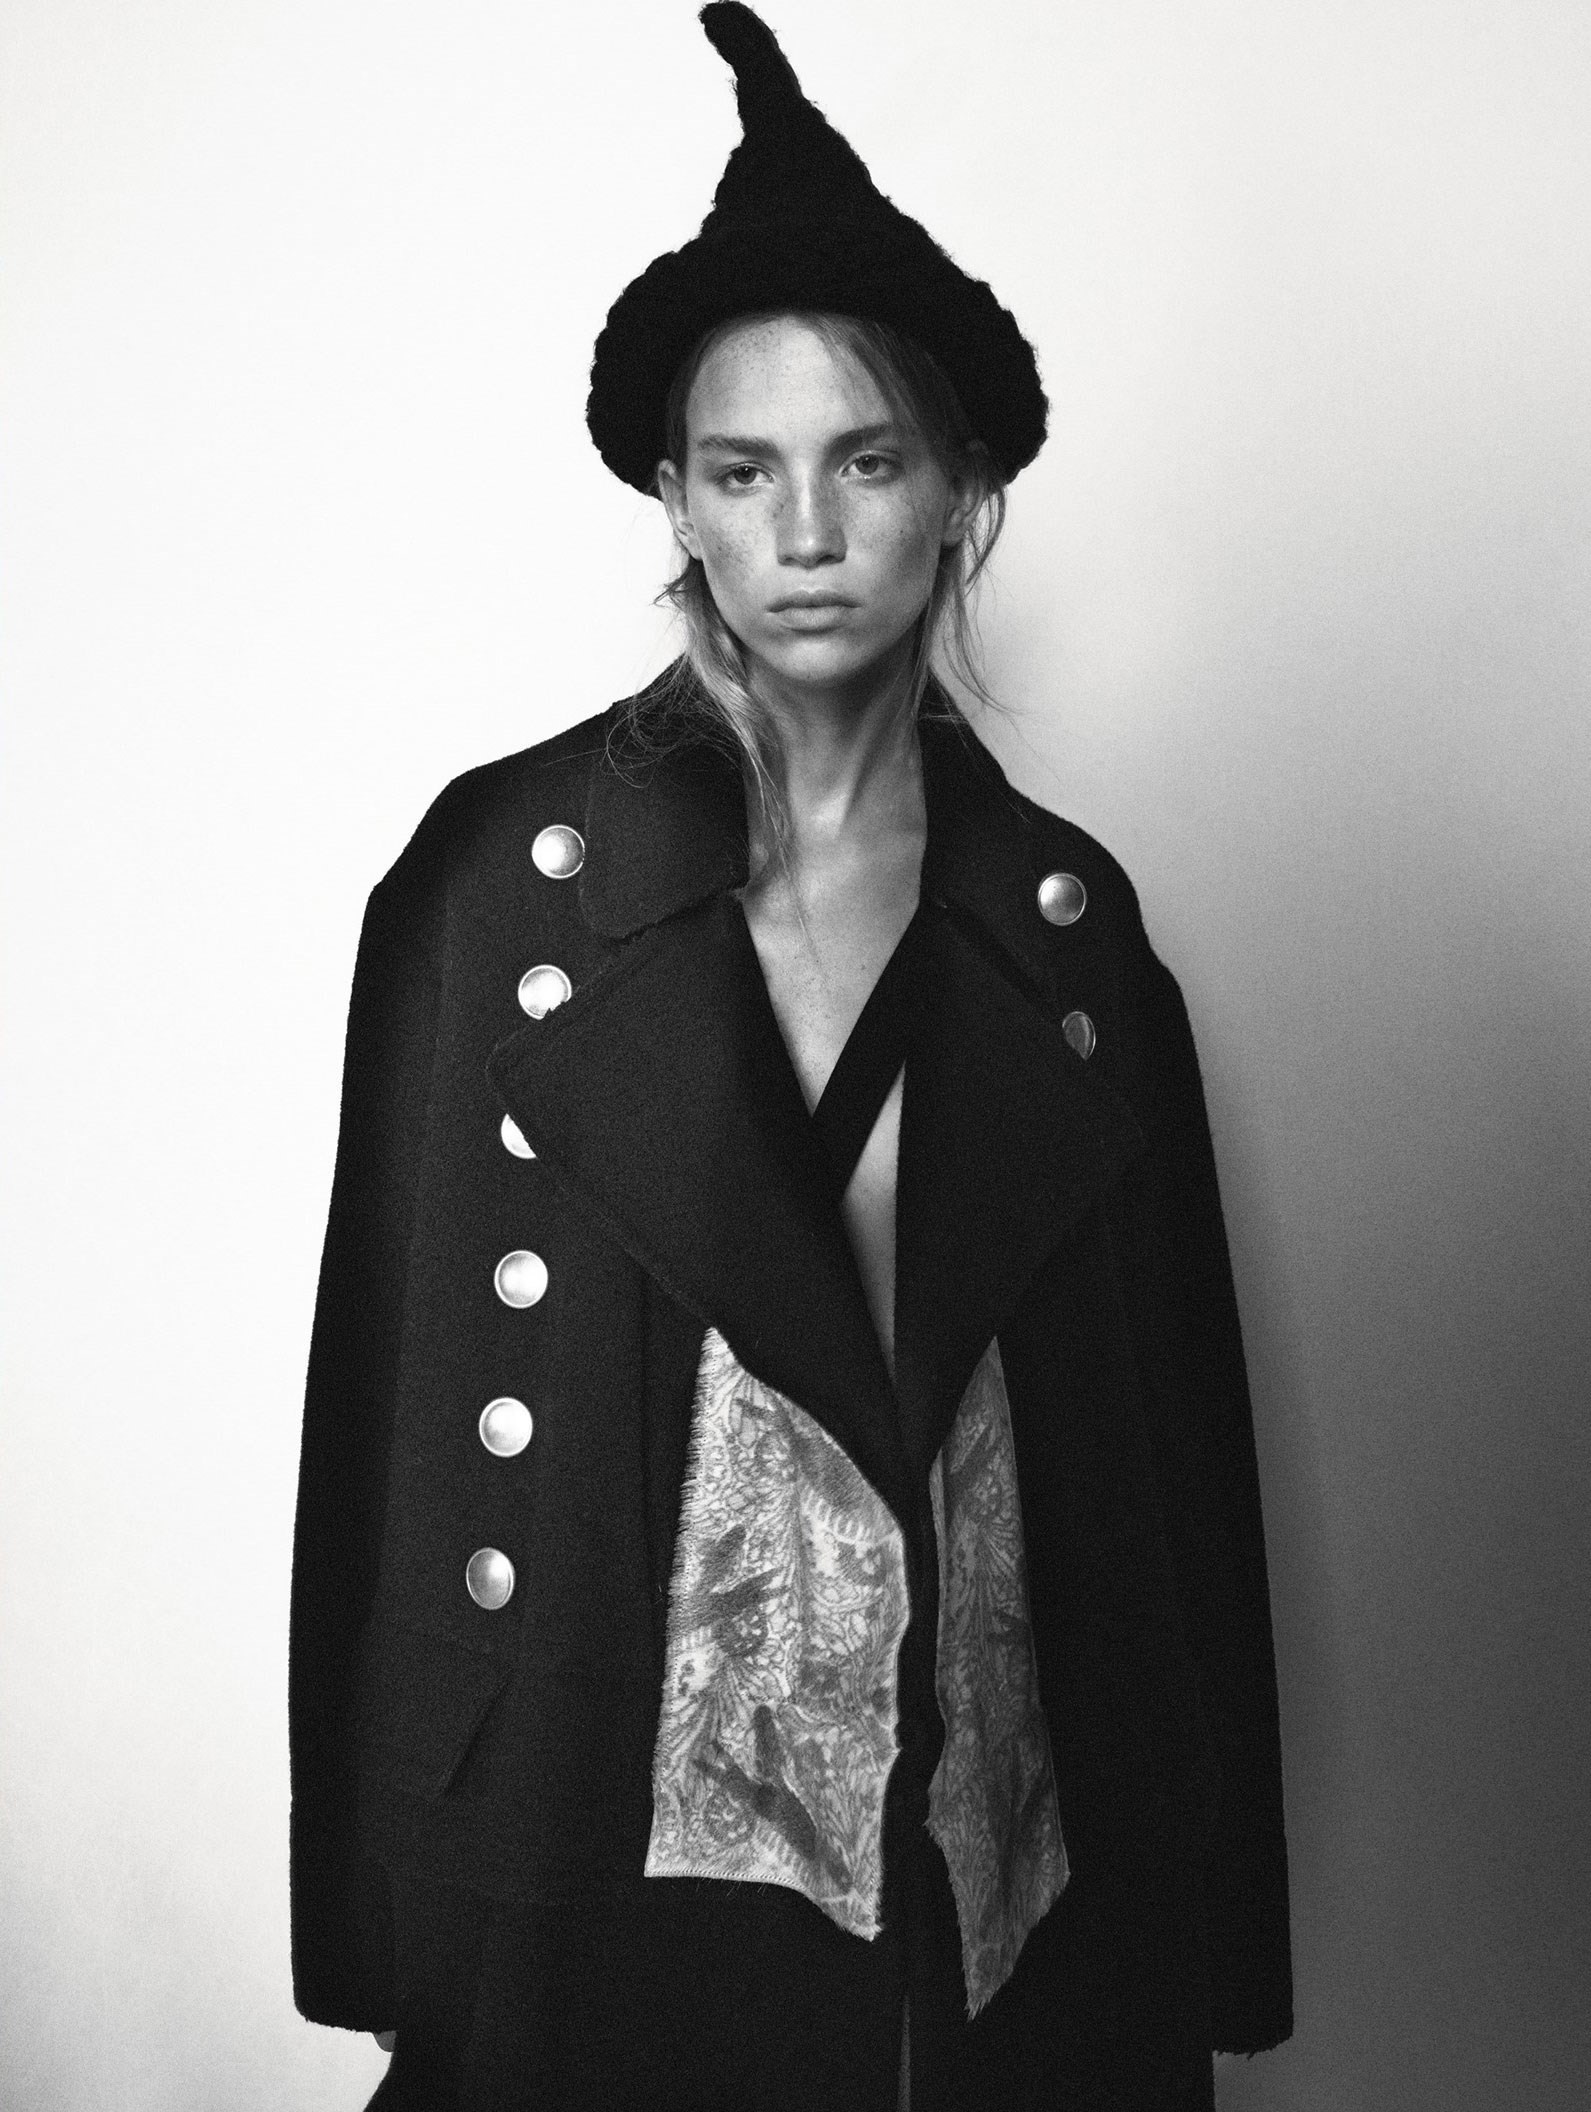 Photography by David Sims, Styling by Katy England